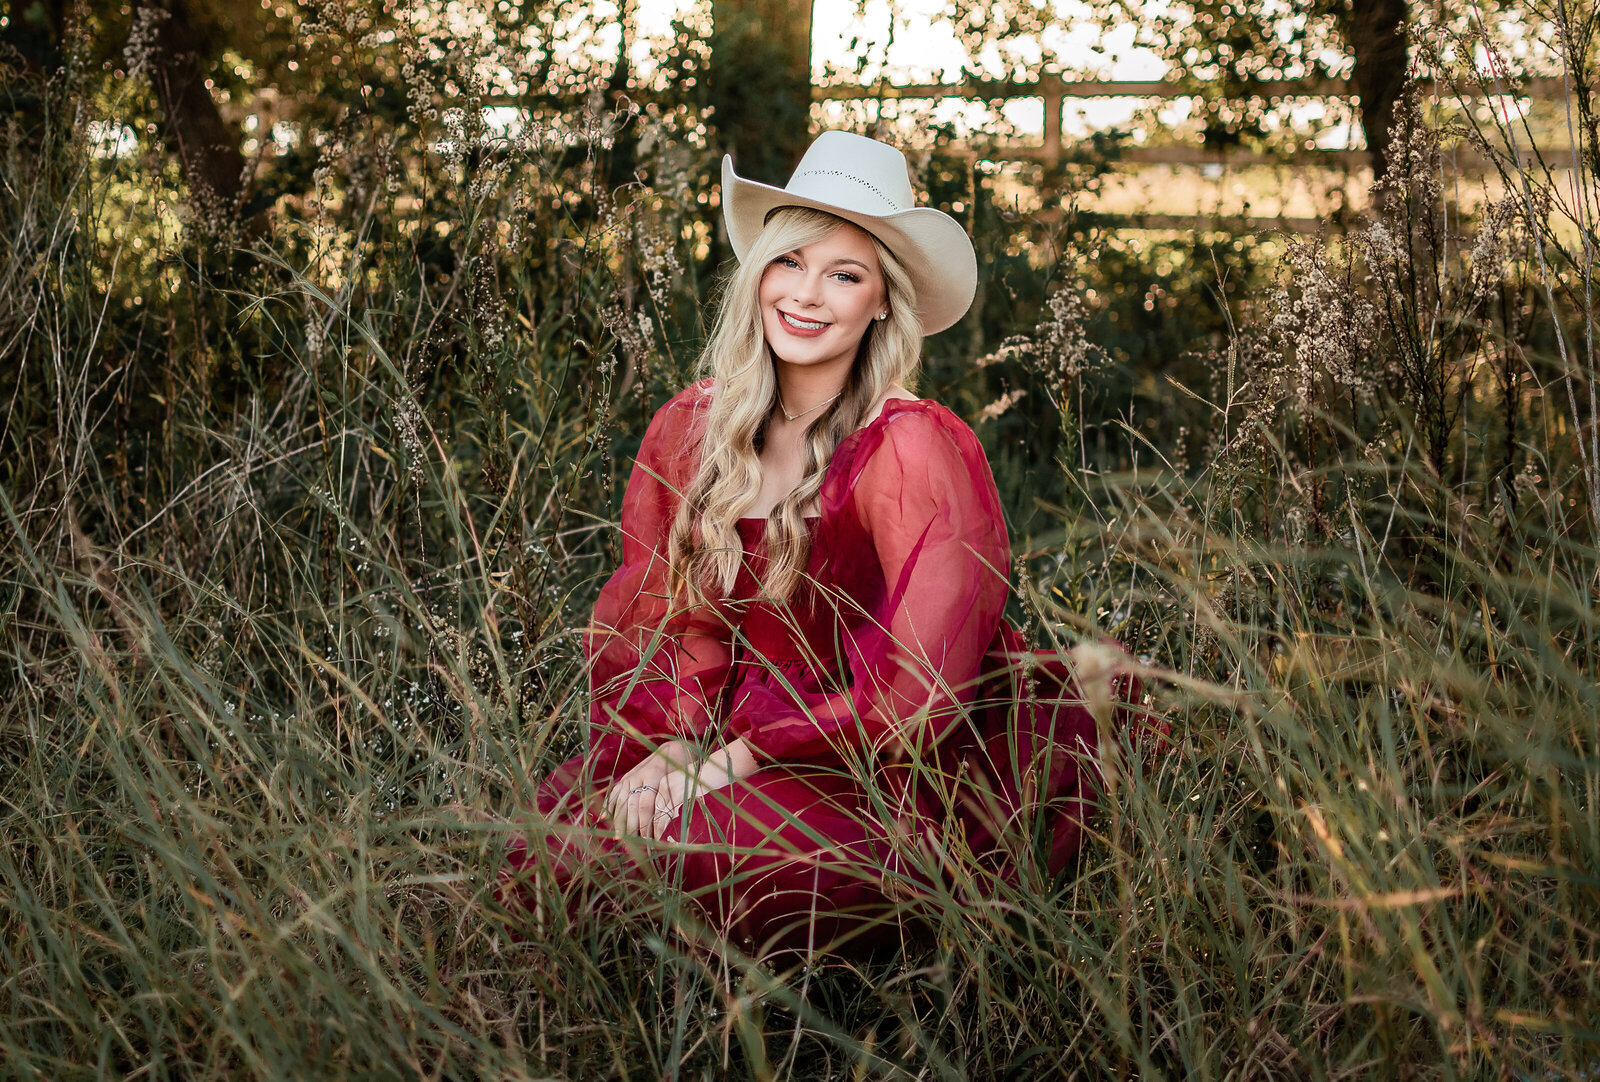 A Friendswood senior in a red dress sits in a field of long grass.